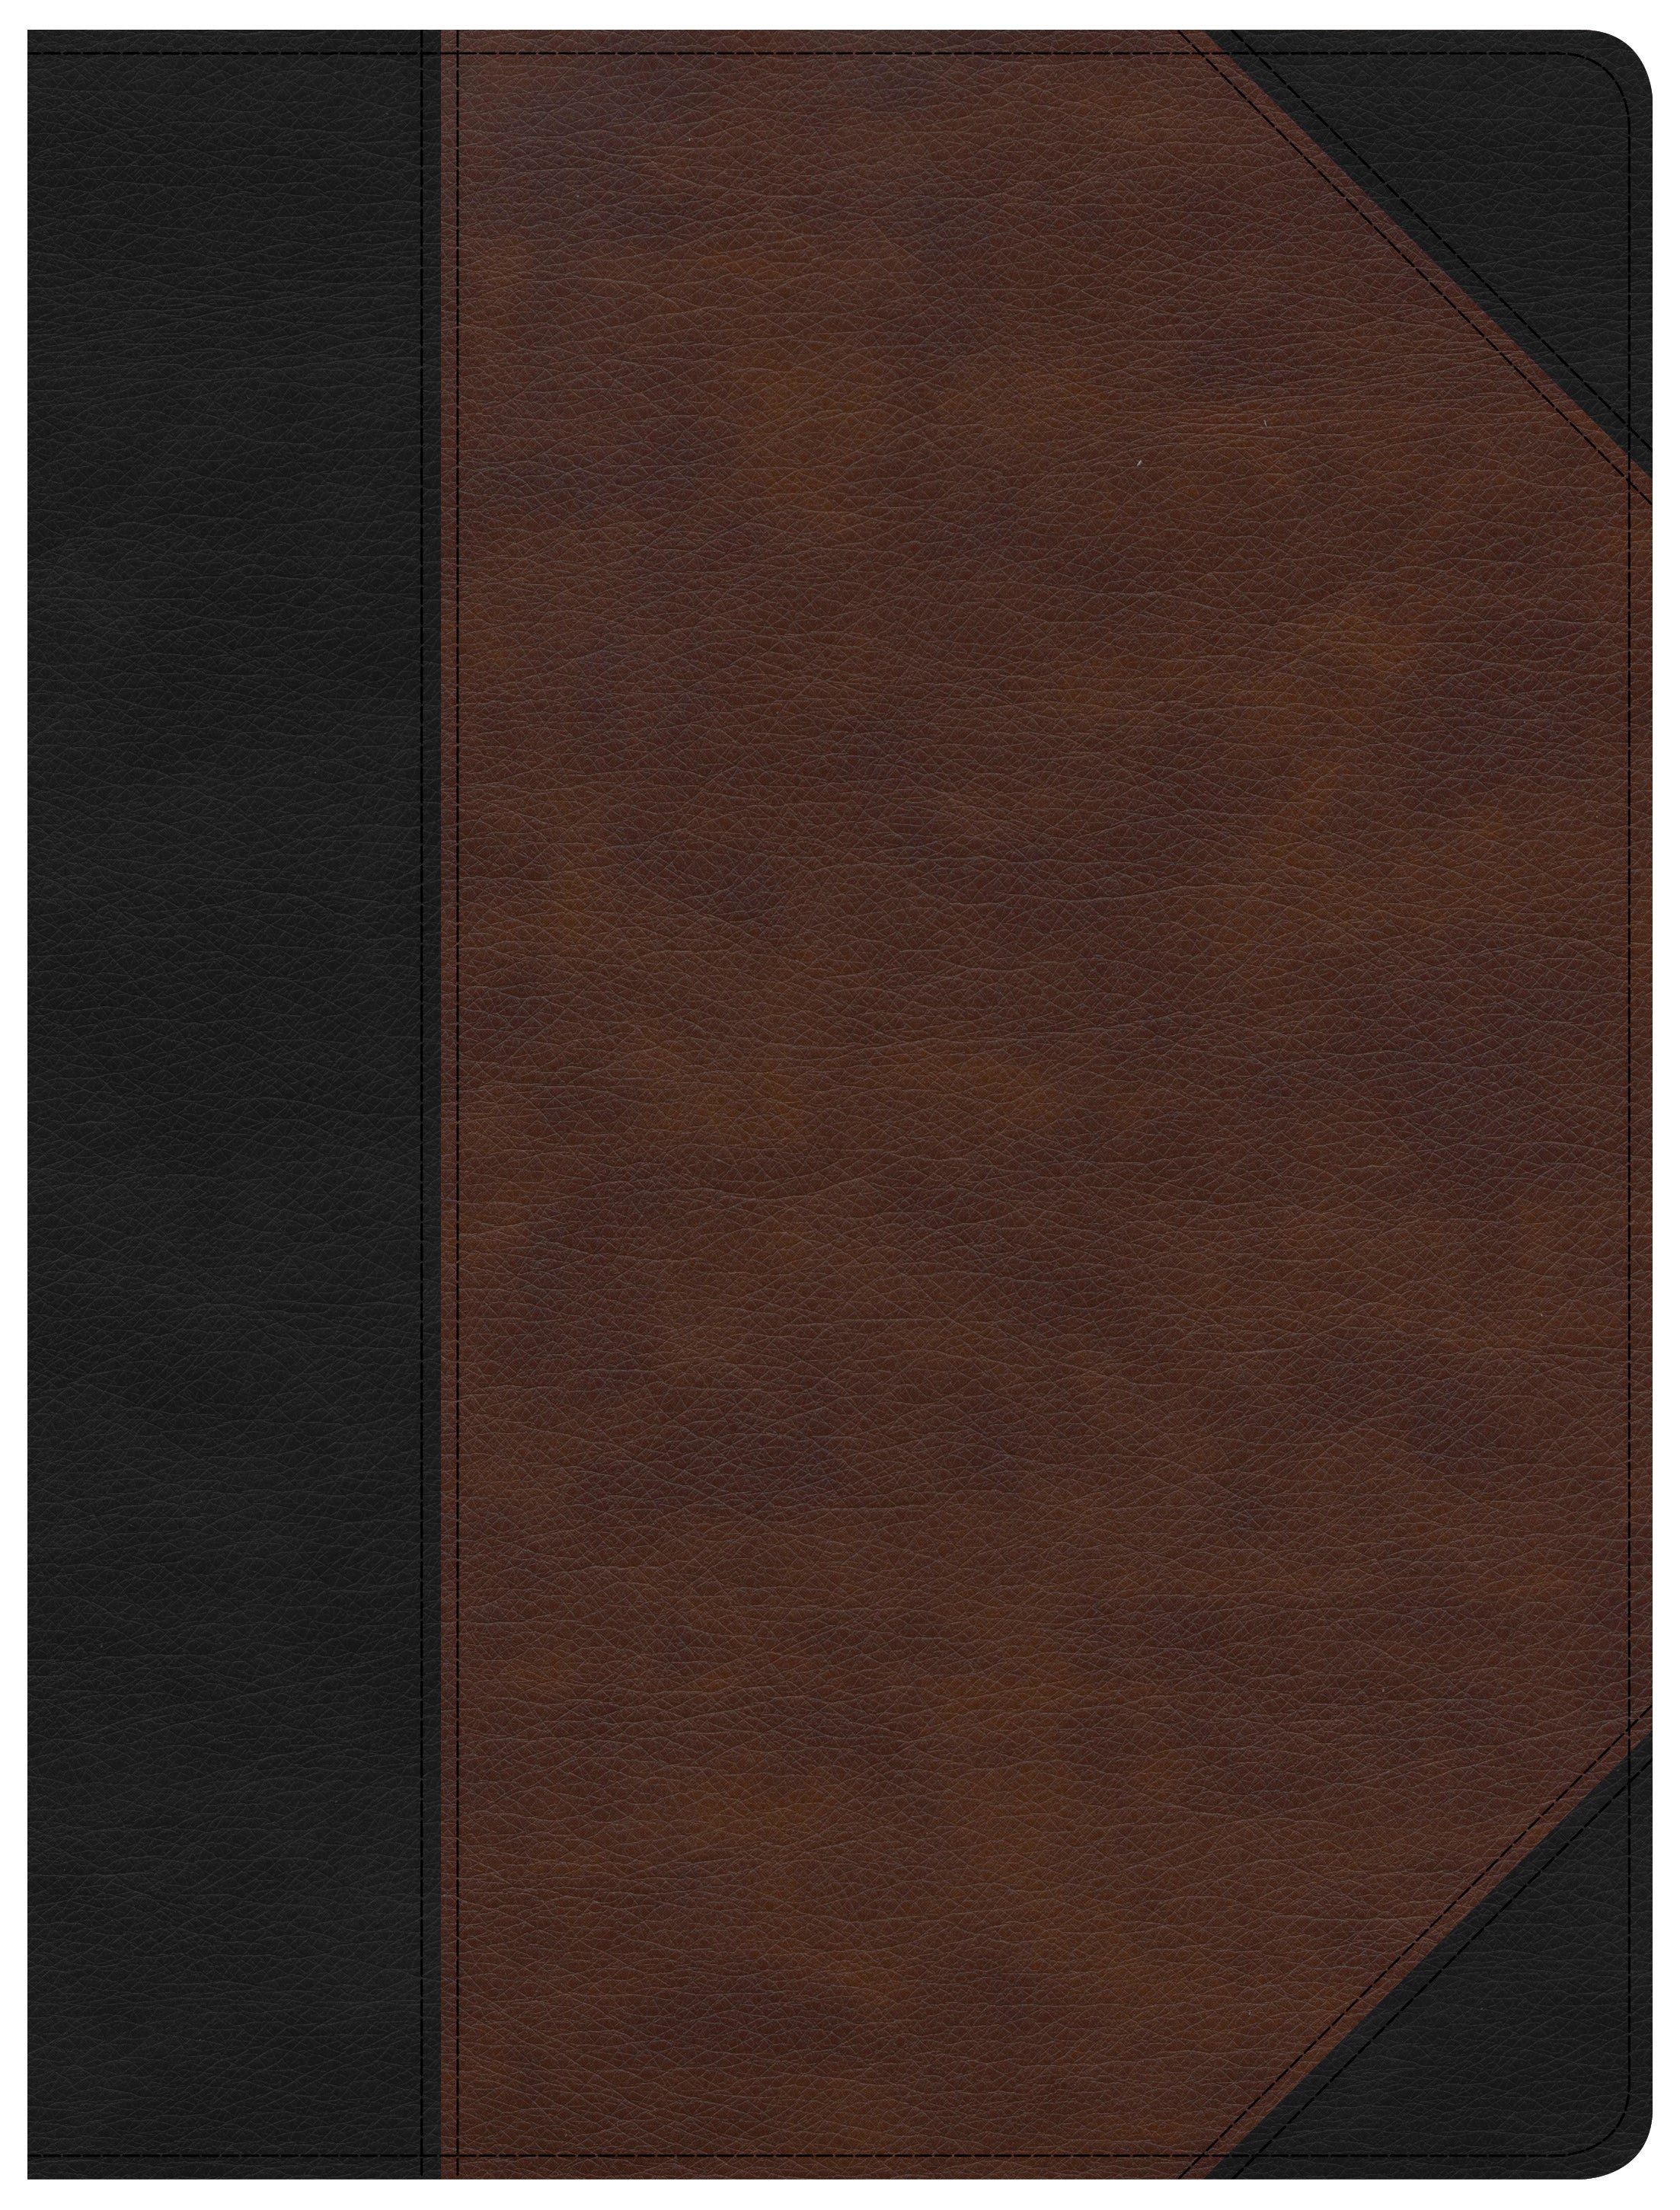 Image of CSB Tony Evans Study Bible, Black/Brown, Imitation Leather, Maps, Ribbon Marker, Presentation Page, Study Notes,Maps other